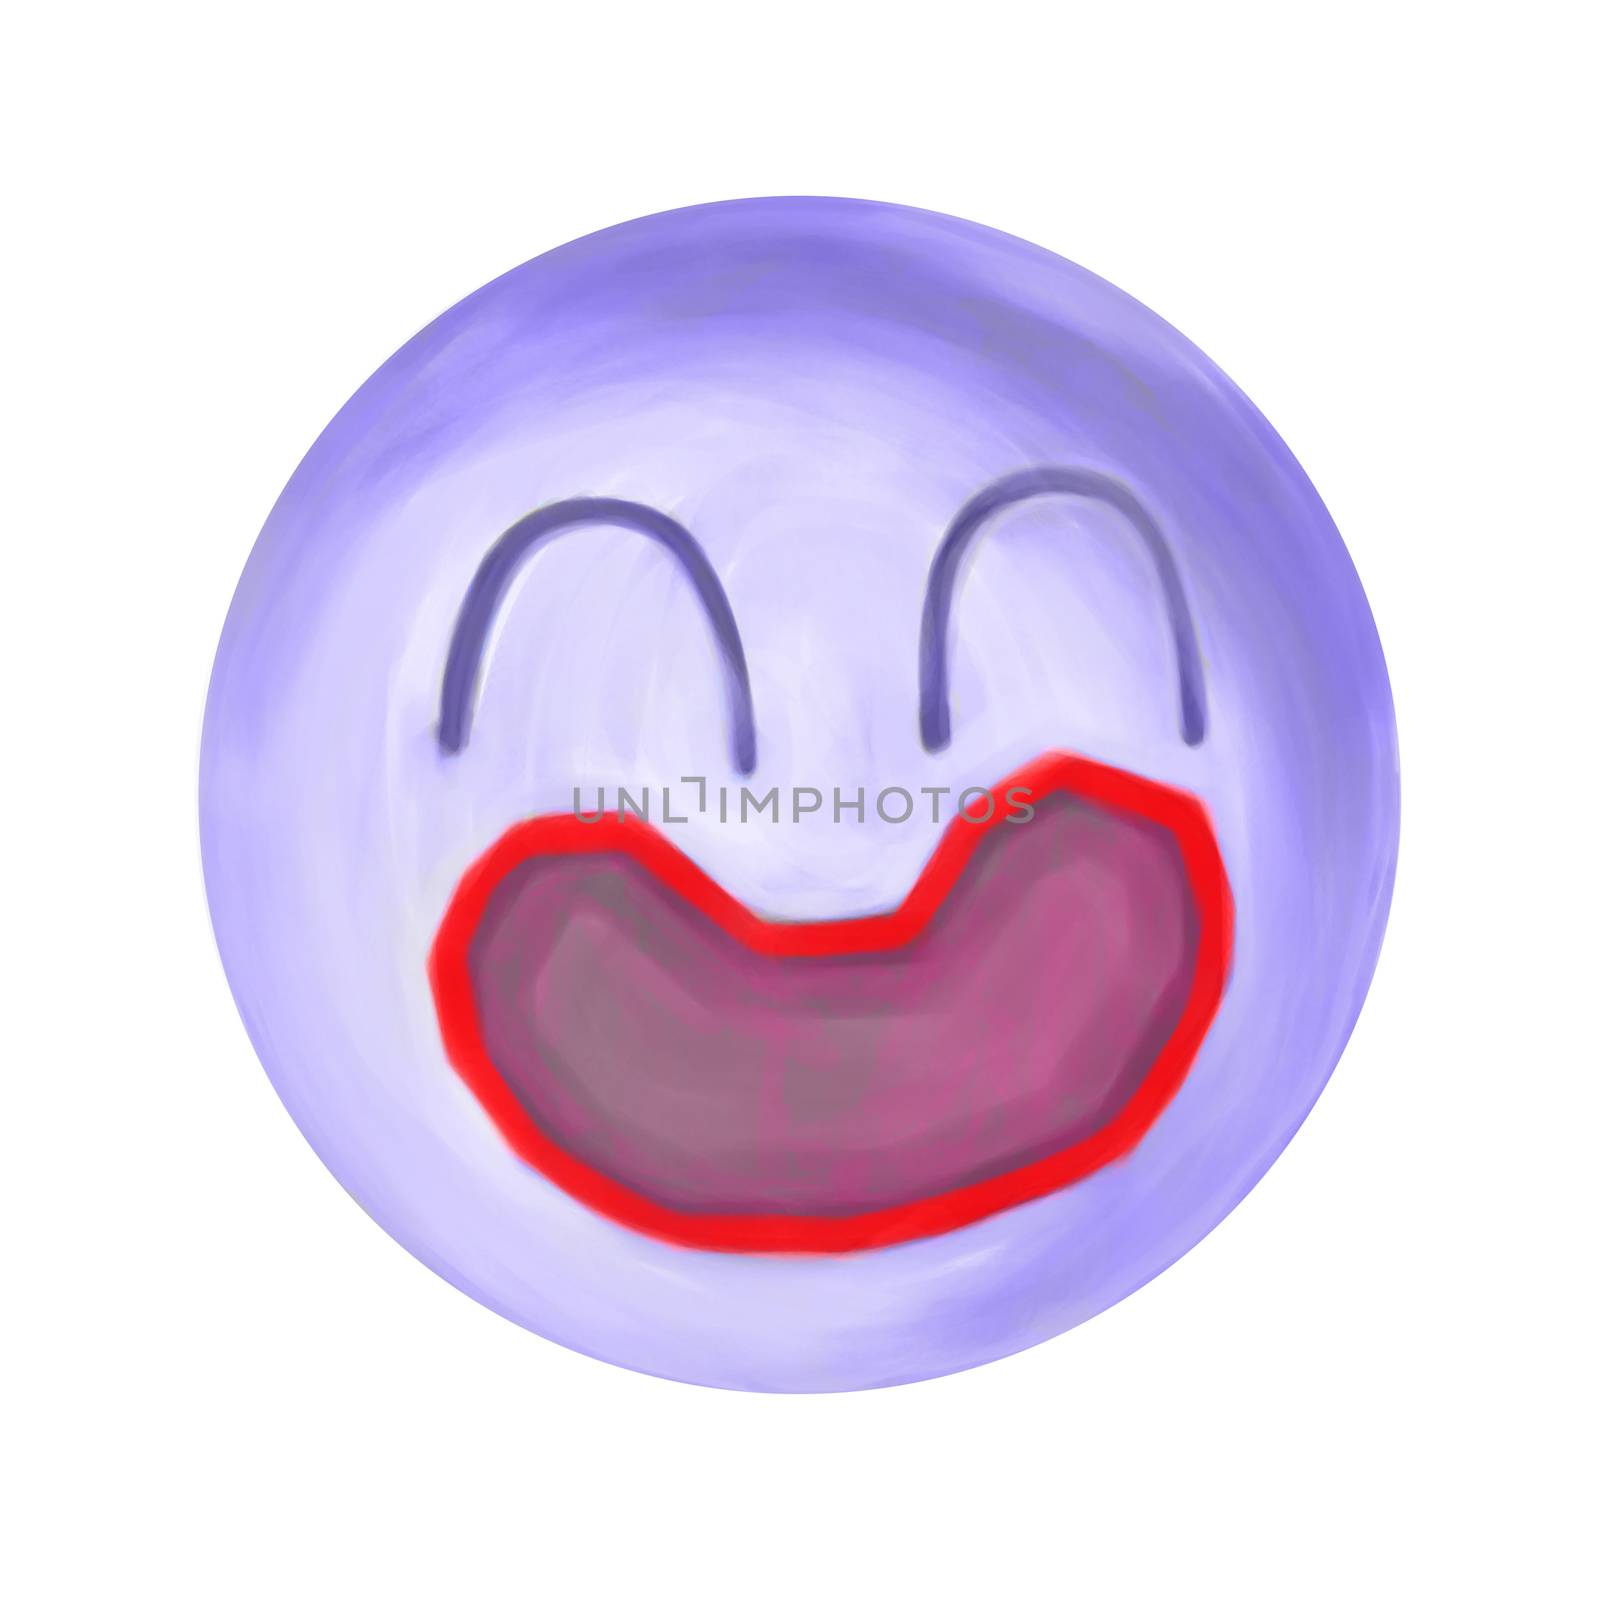 Illustration: The Strange Smiley Emoji Ball. When you are happy, it is happy. When you are sad, it is sad.  Are you really happy now? Element / Character Design - Fantastic / Cartoon Style by NextMars